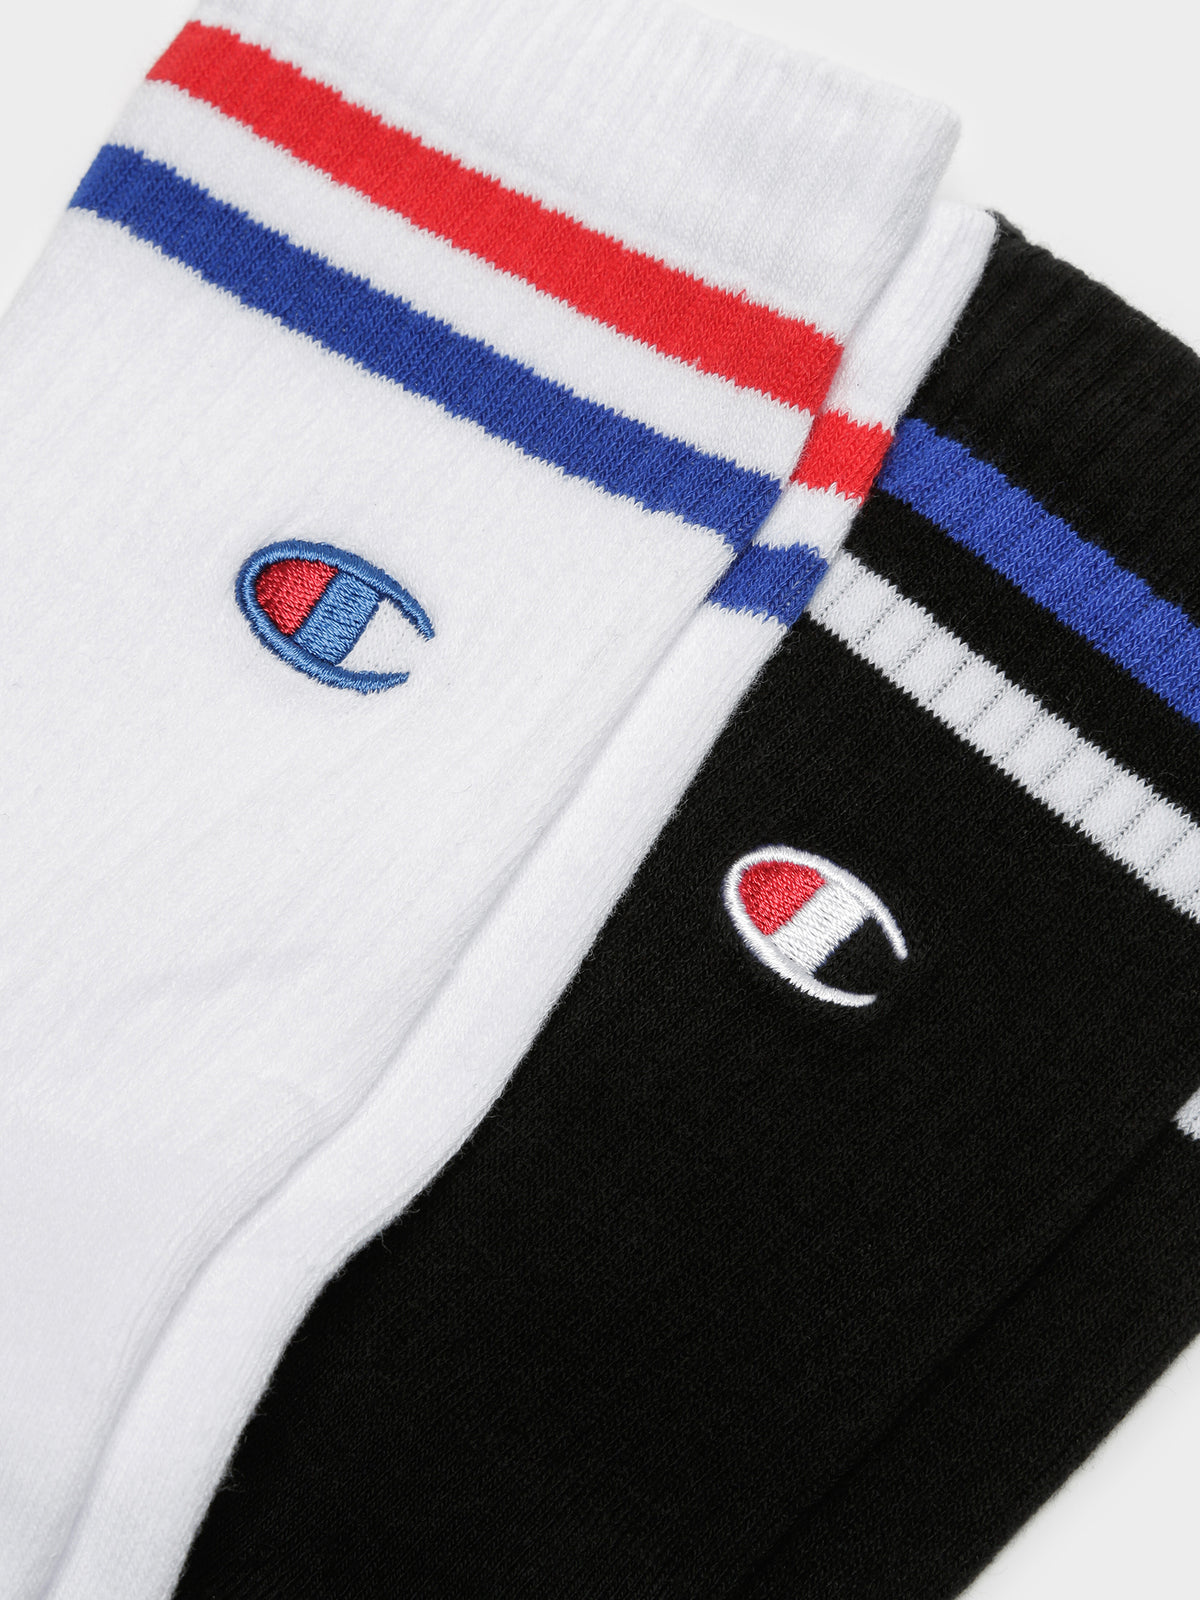 2 Pairs of Branded C Crew Socks in White and Black